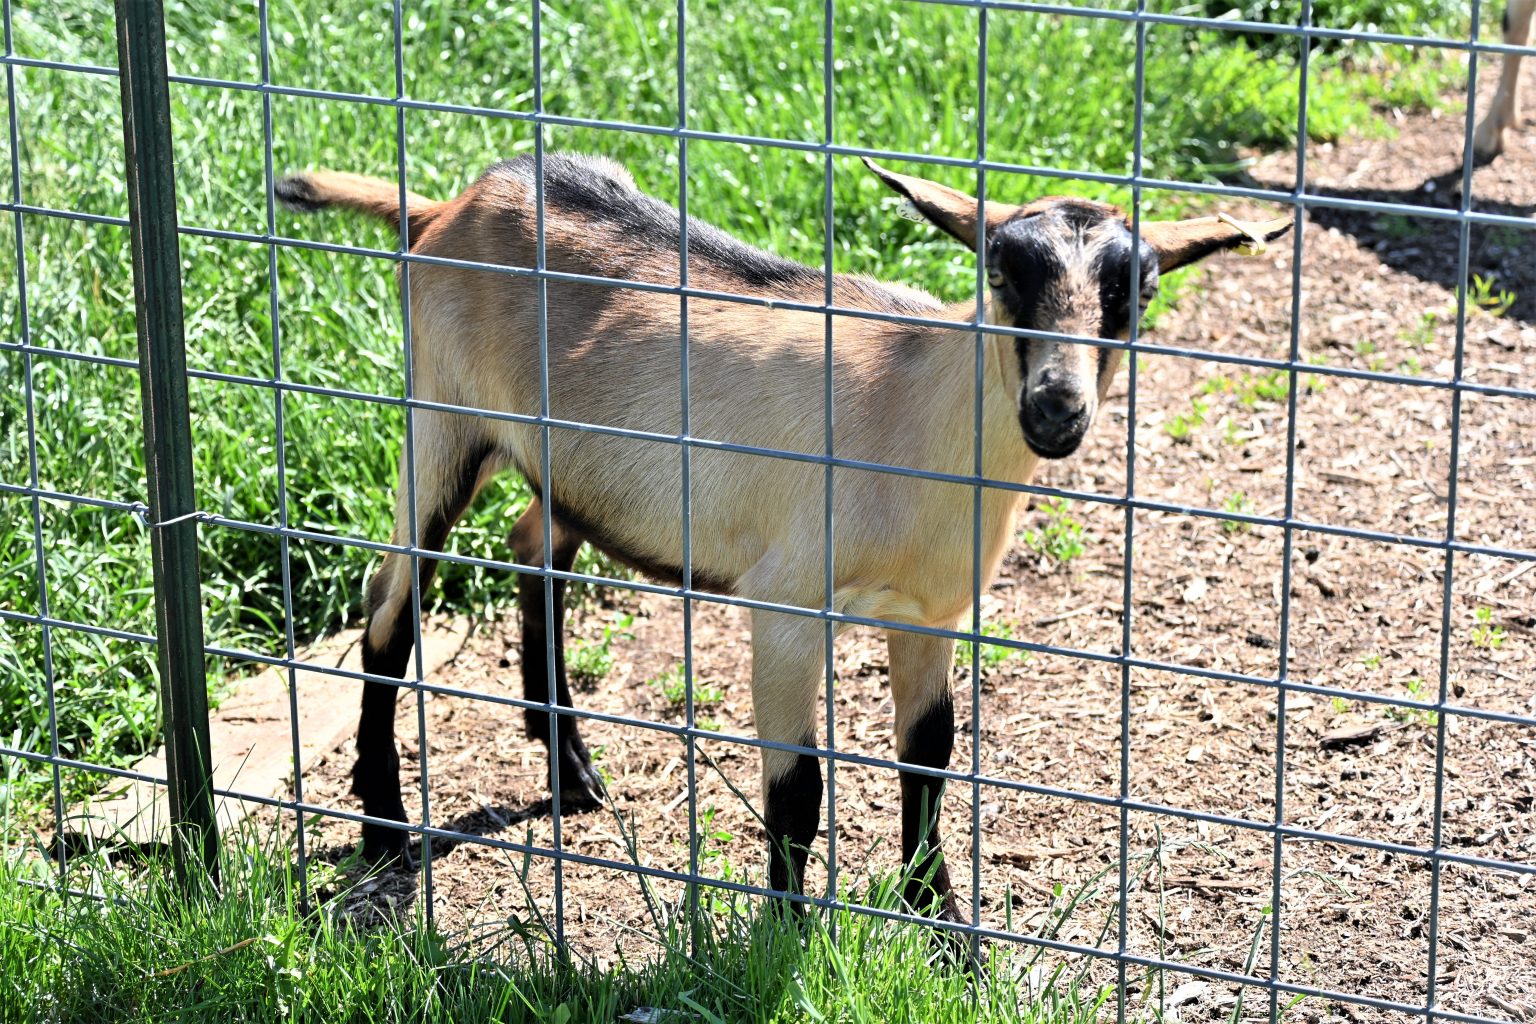 Goat Dairy To Host Fond Du Lac County Breakfast On The Farm 1330